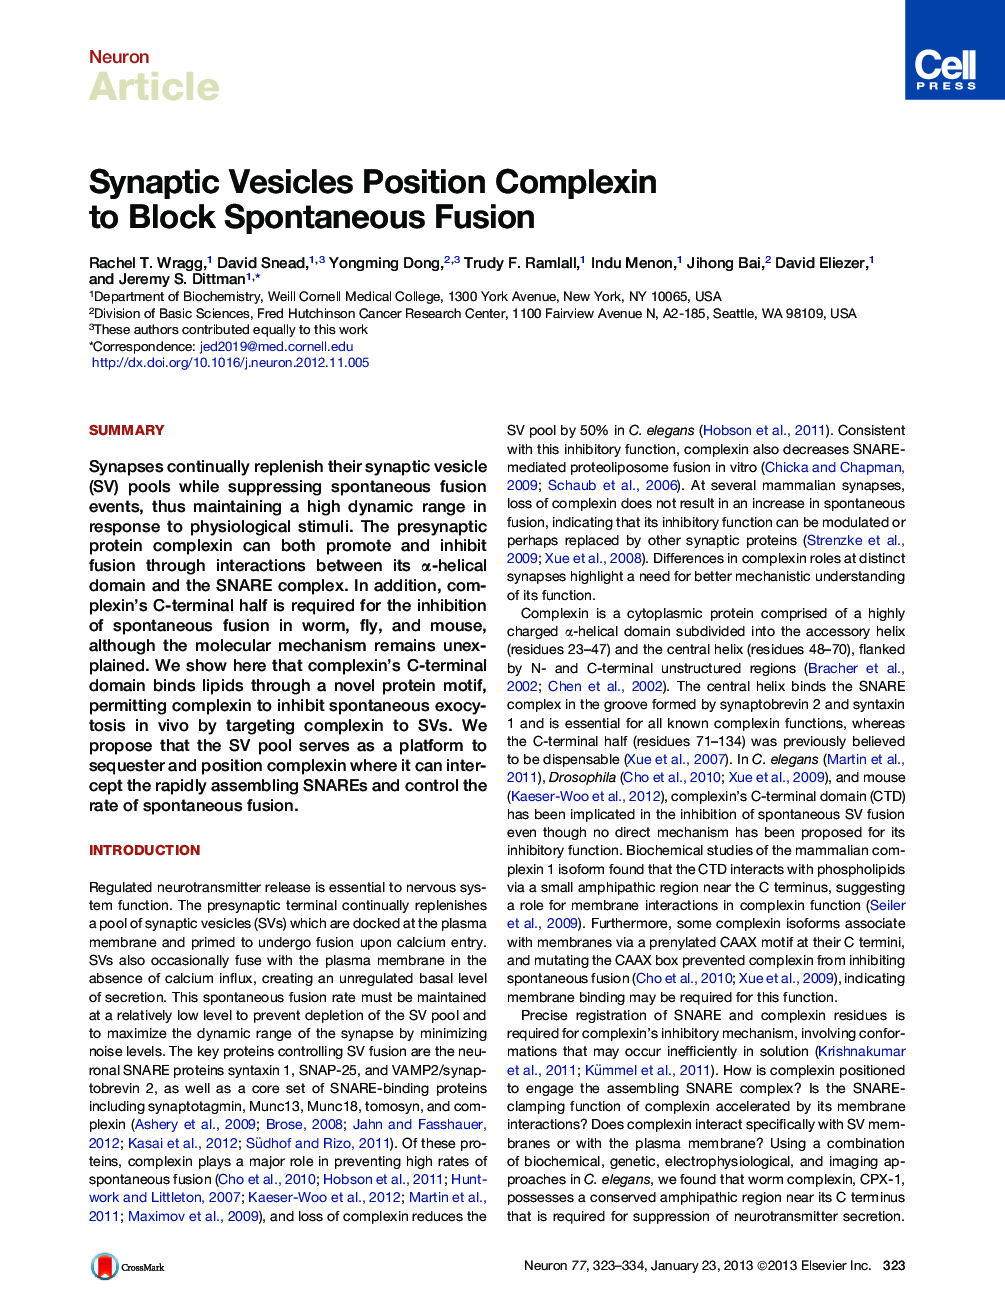 Synaptic Vesicles Position Complexin to Block Spontaneous Fusion